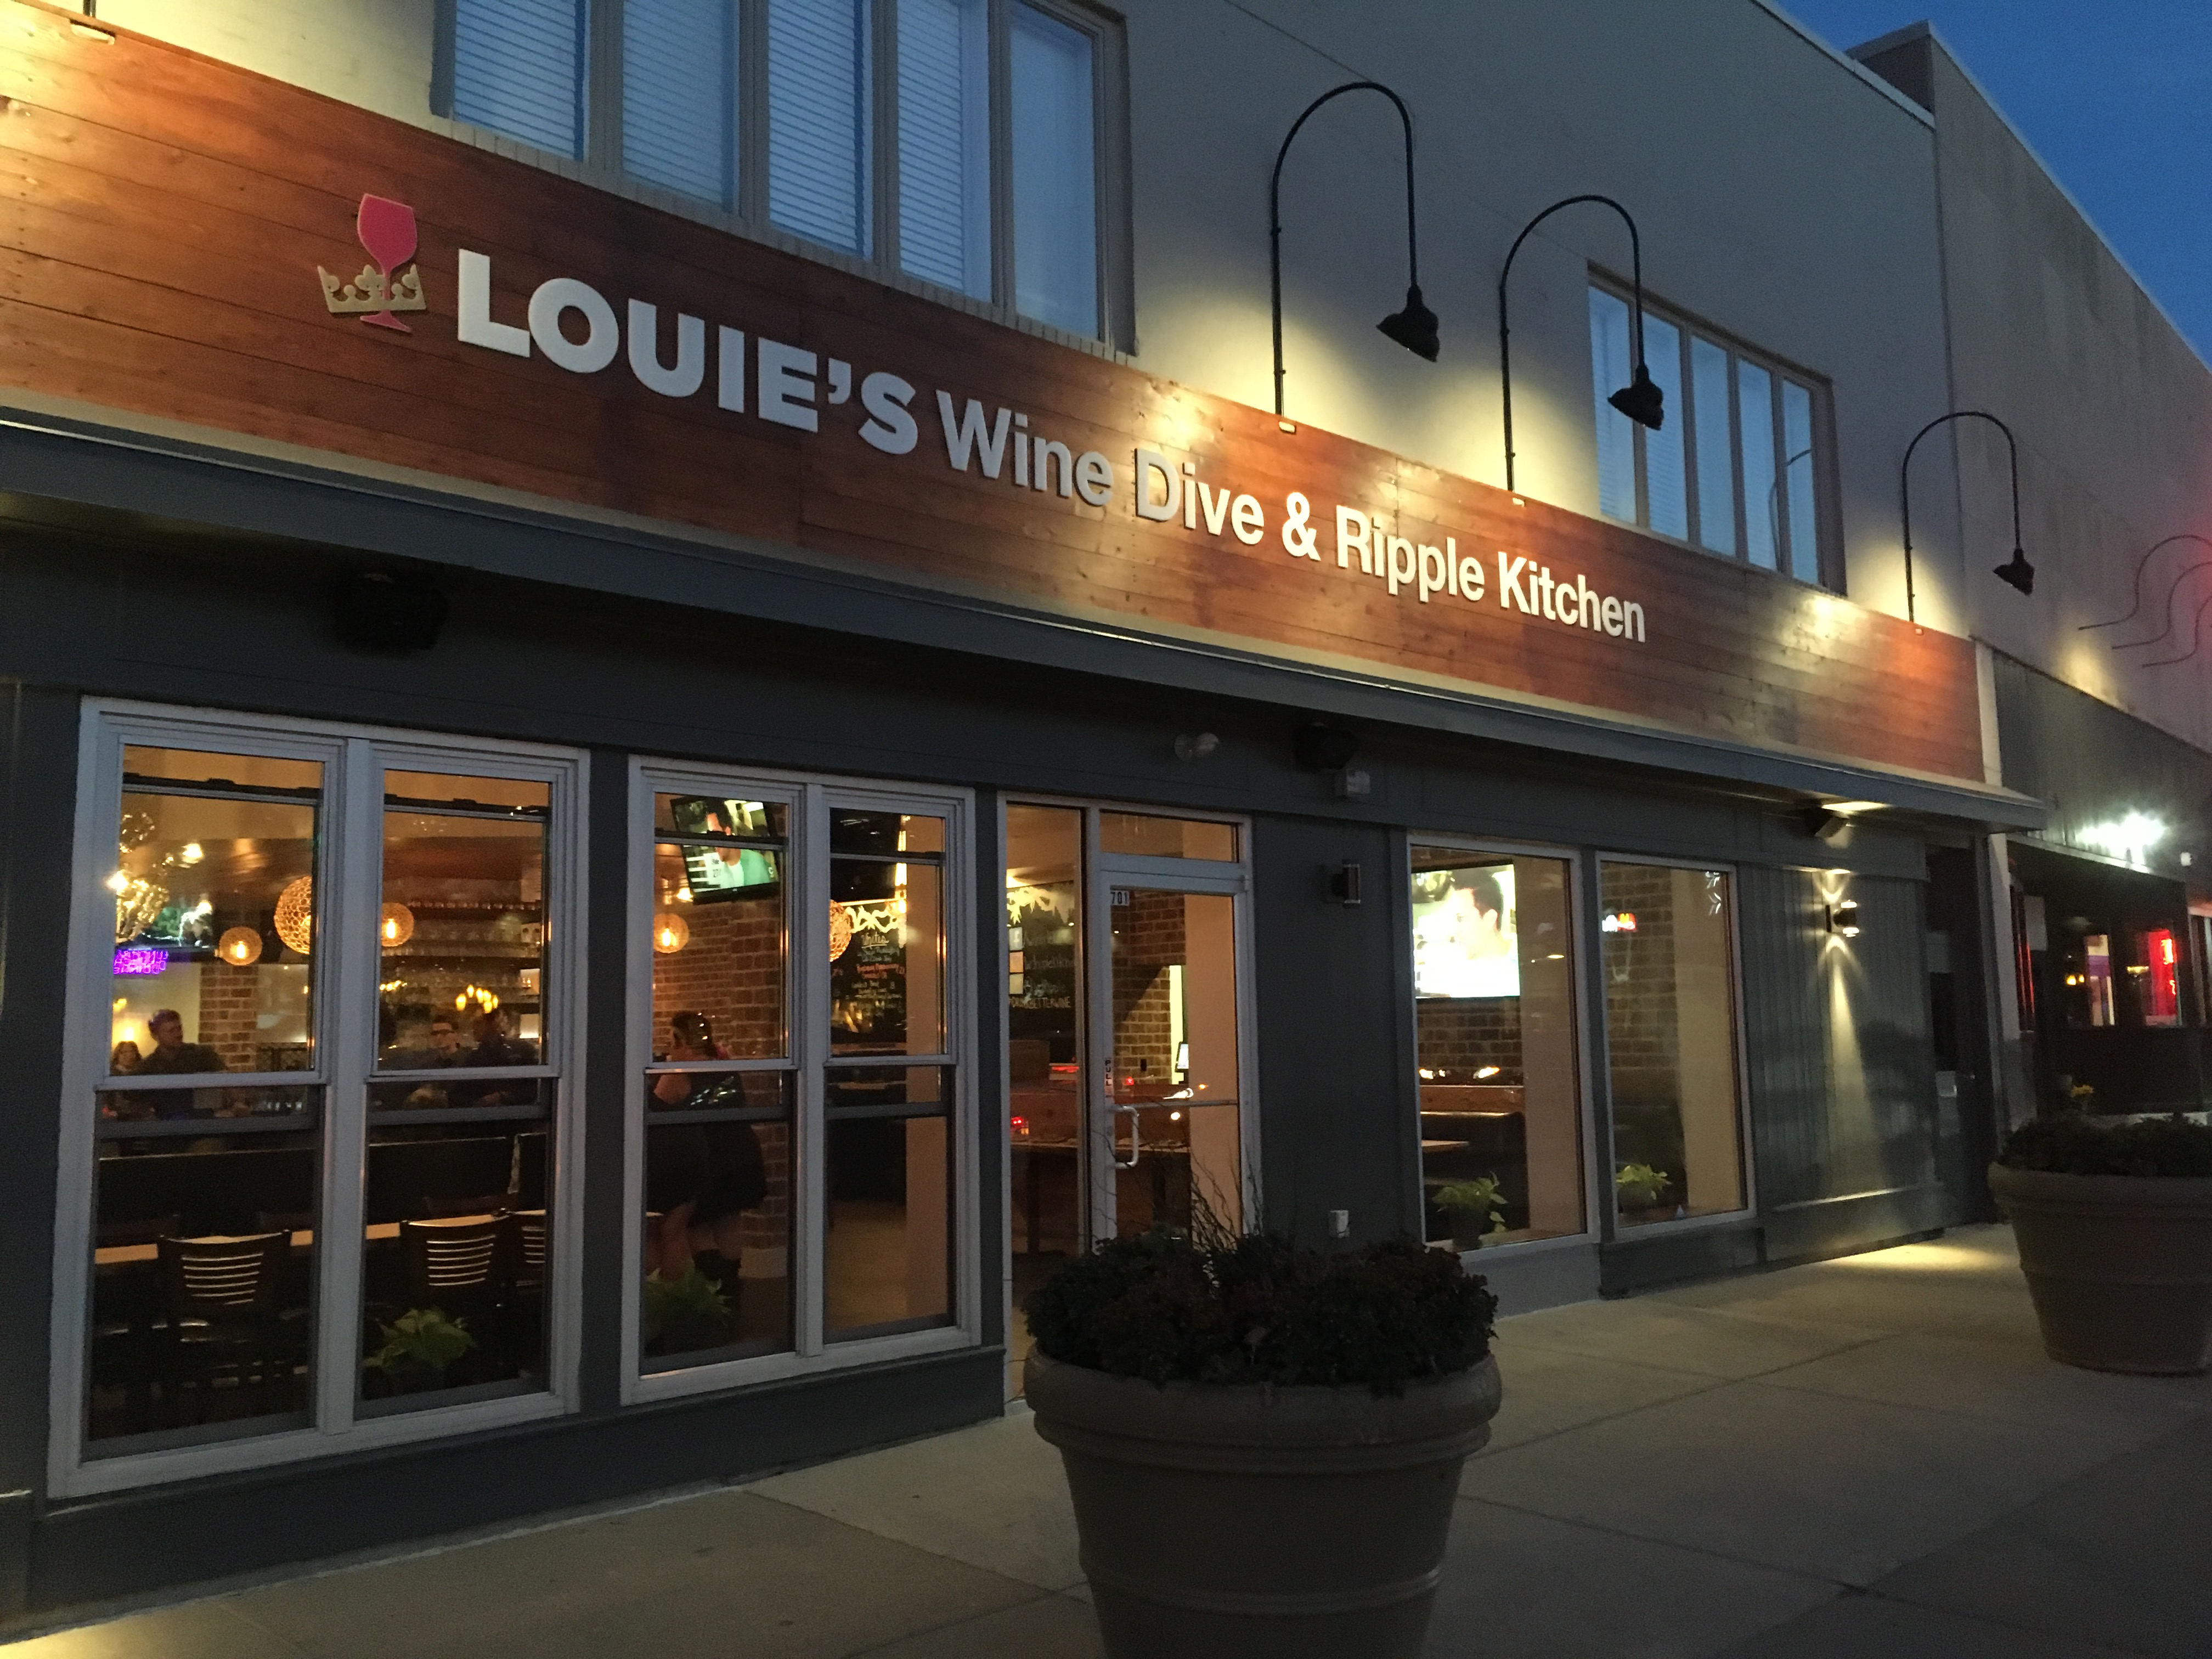 The exterior of Louie's Wine Dive & Ripple Kitchen on the corner of College and Broad Ripple Avenue.